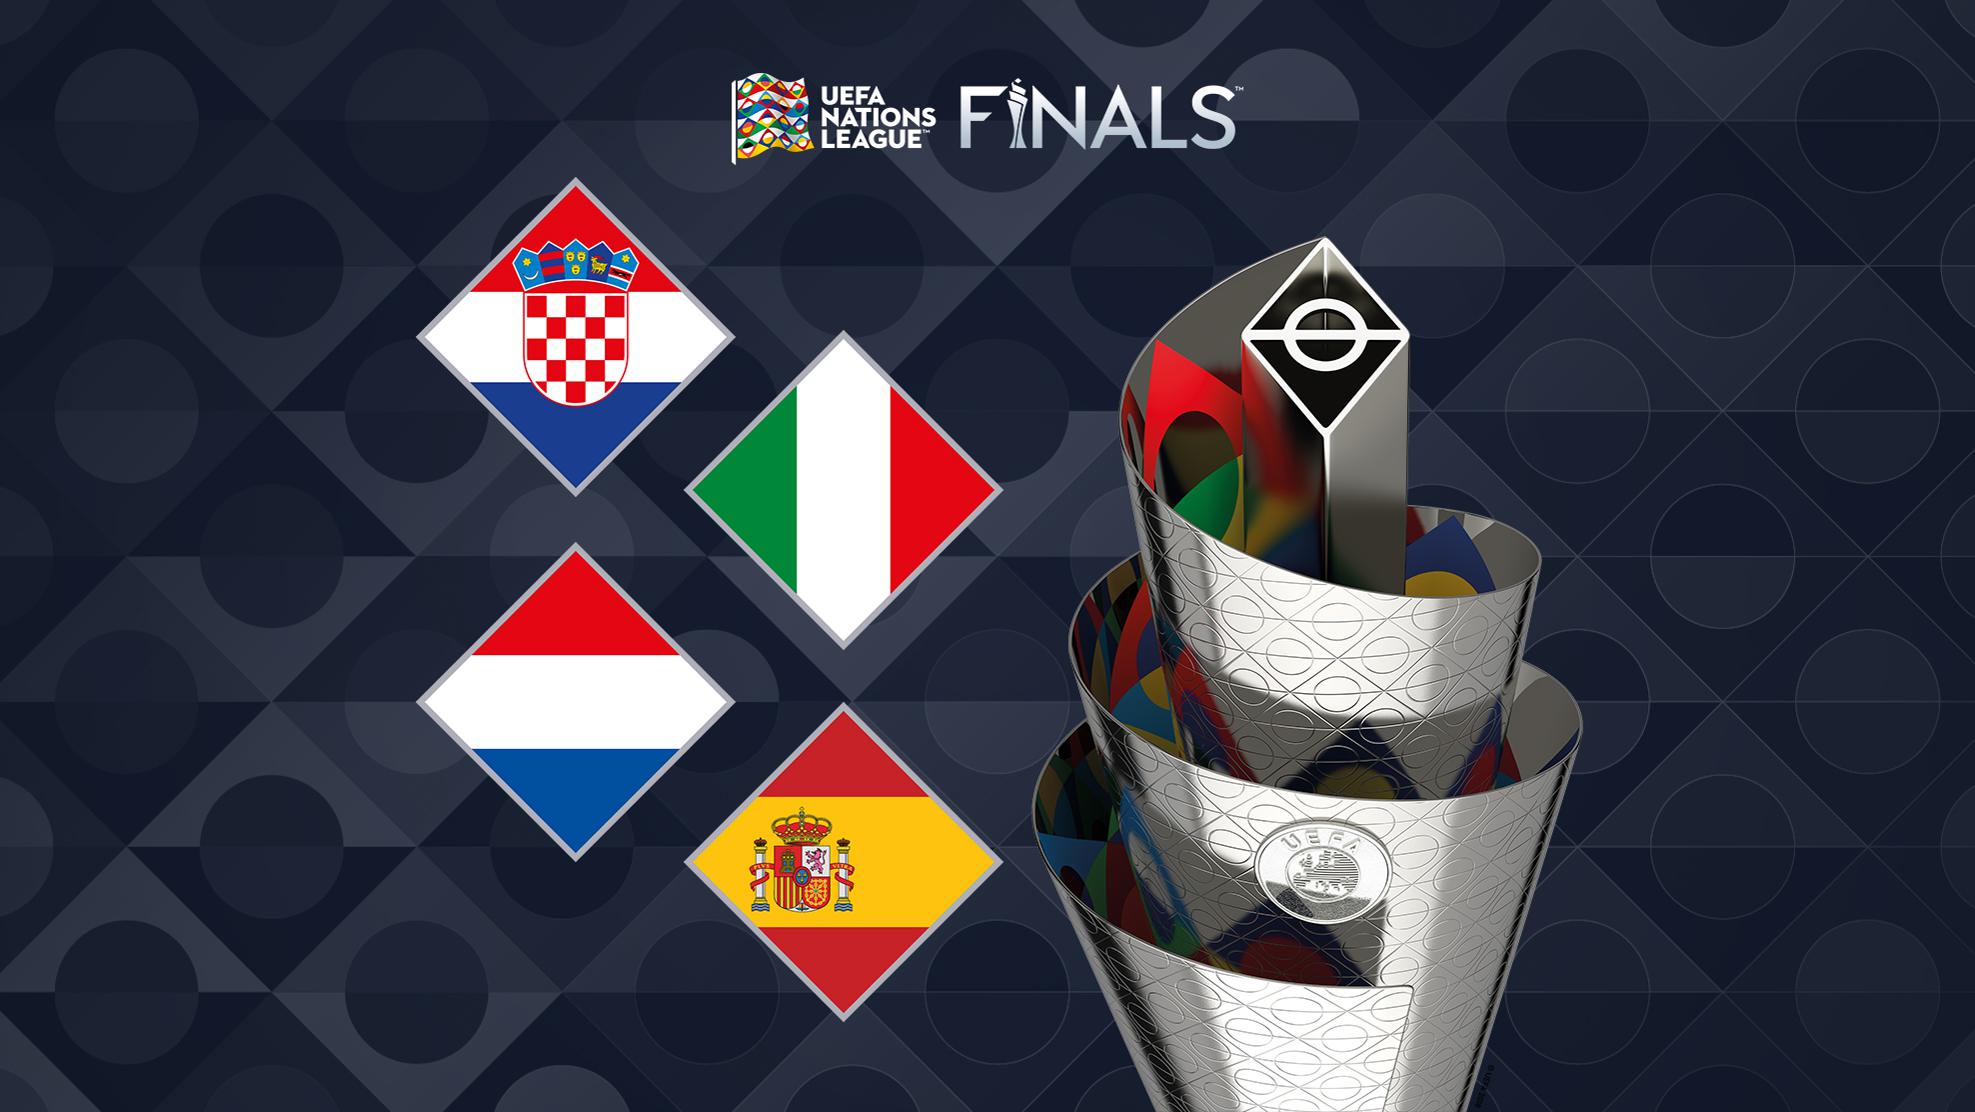 OFFICIAL! Croatia Will Play The Dutch In Nations League Semifinal #1 On June 14th In Rotterdam